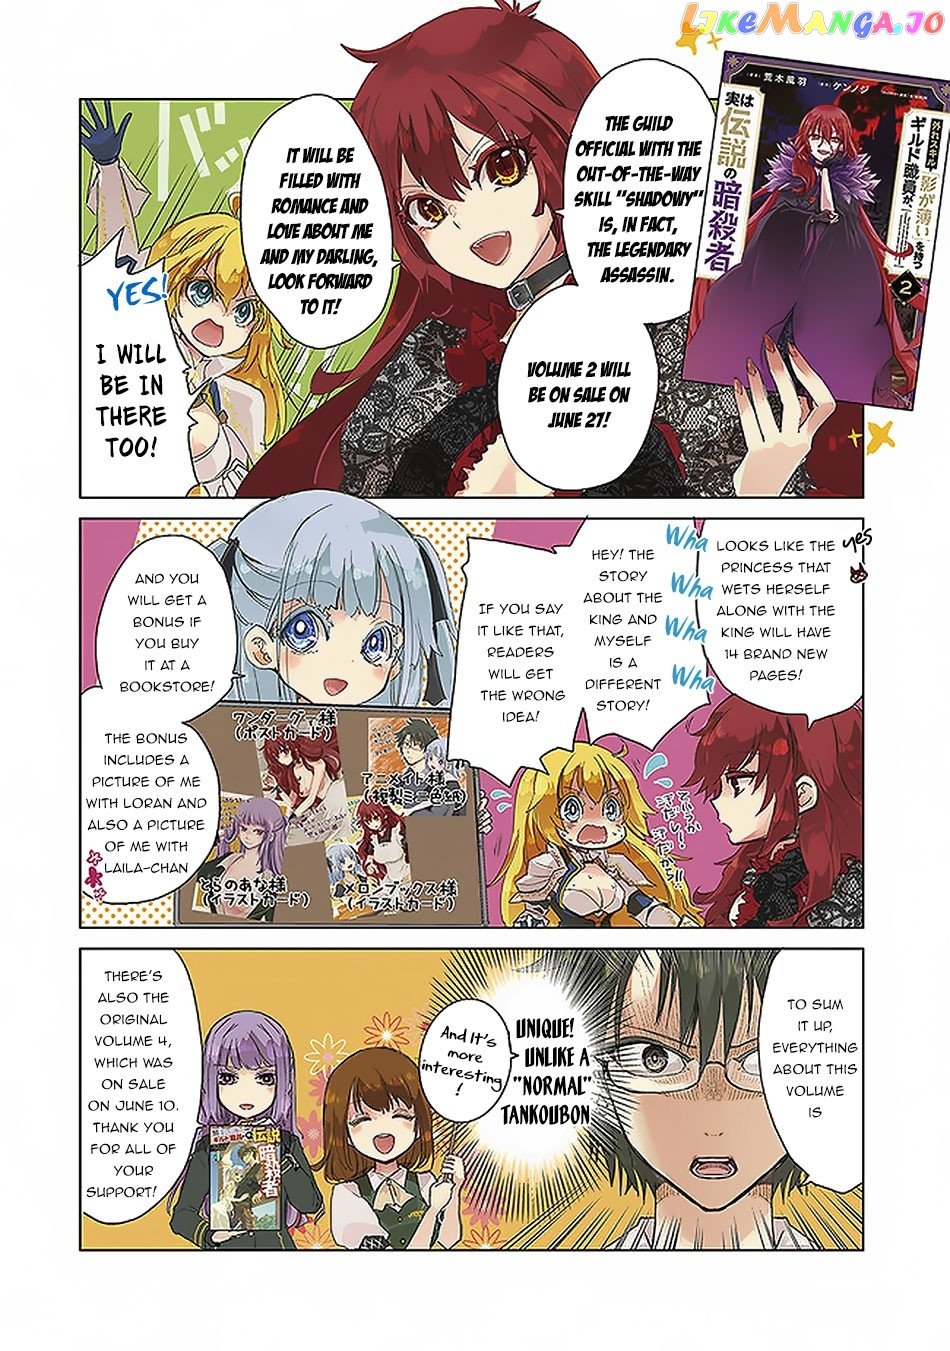 The Guild Official With The Out-of-the-Way Skill “Shadowy” Is, In Fact, The Legendary Assassin chapter 12 - page 28